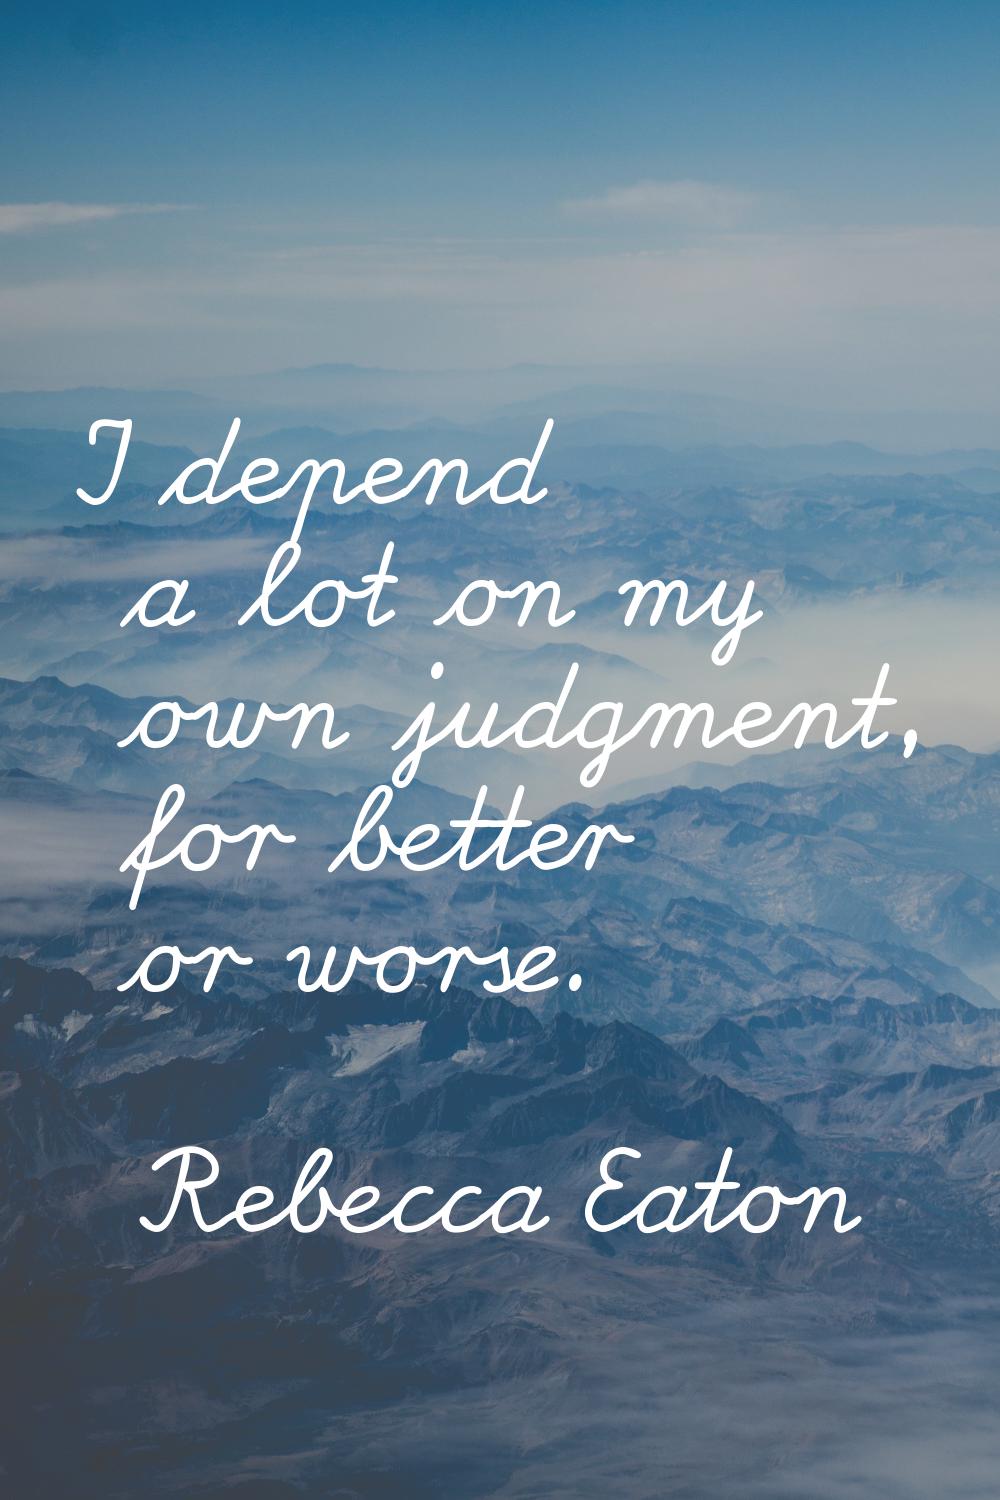 I depend a lot on my own judgment, for better or worse.